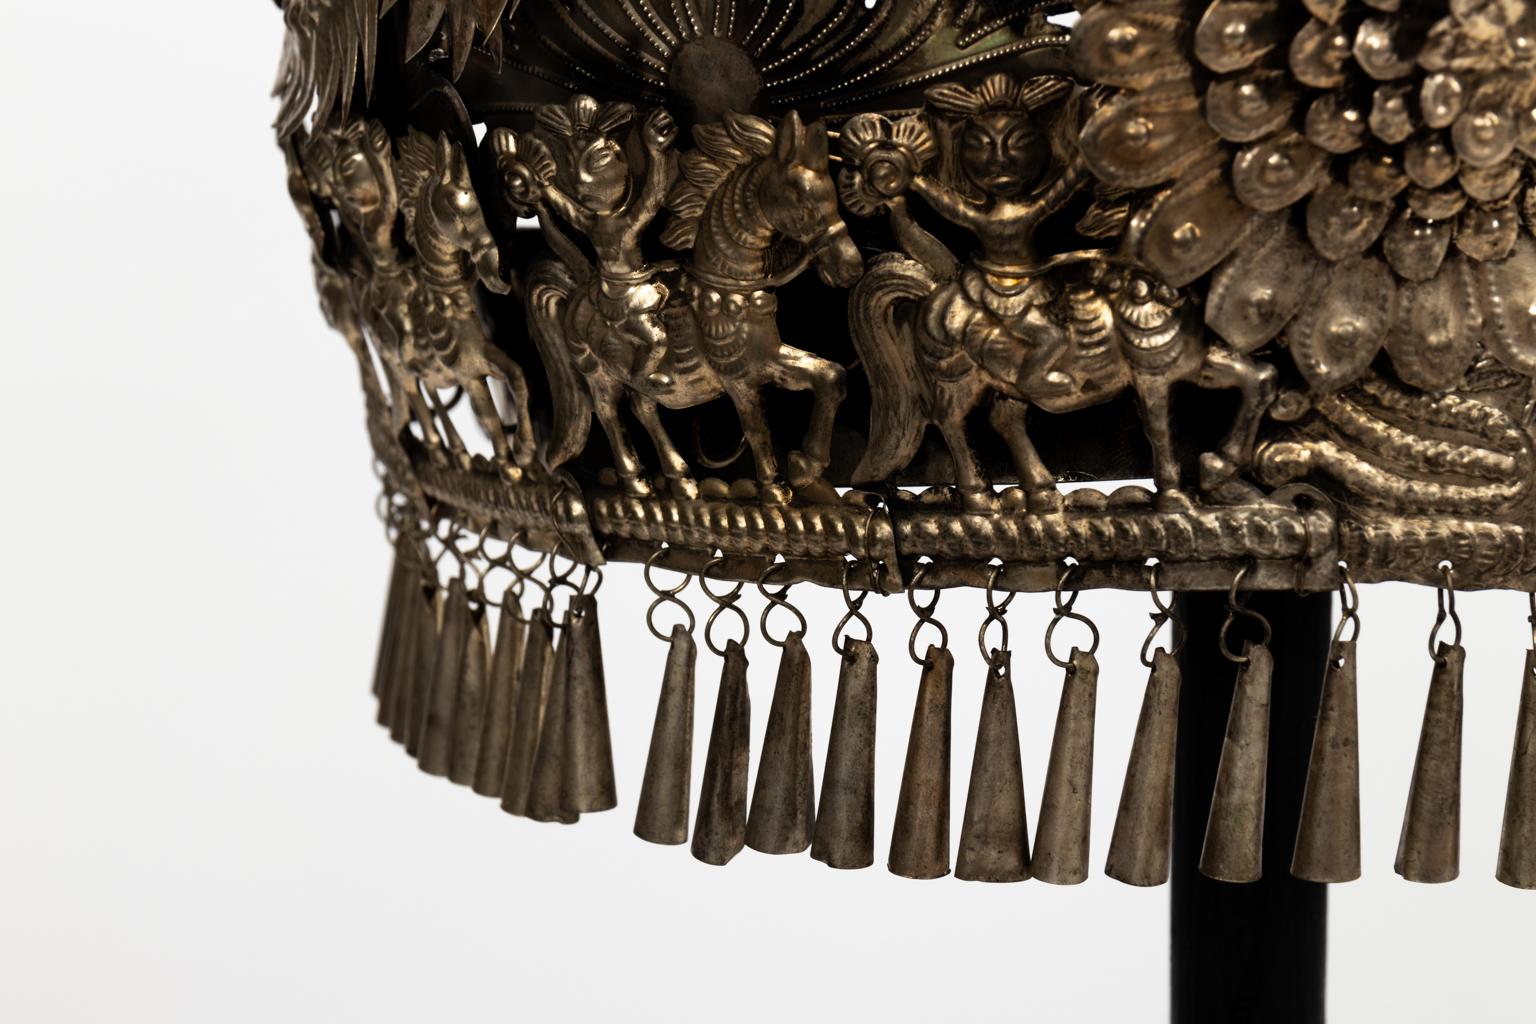 Chinese silver ceremonial wedding headdresses for bride and groom on stands from a later date, circa 19th century. The pieces are heavily decorated with motifs of flowers and horses. Please note of wear consistent with age including finish loss to